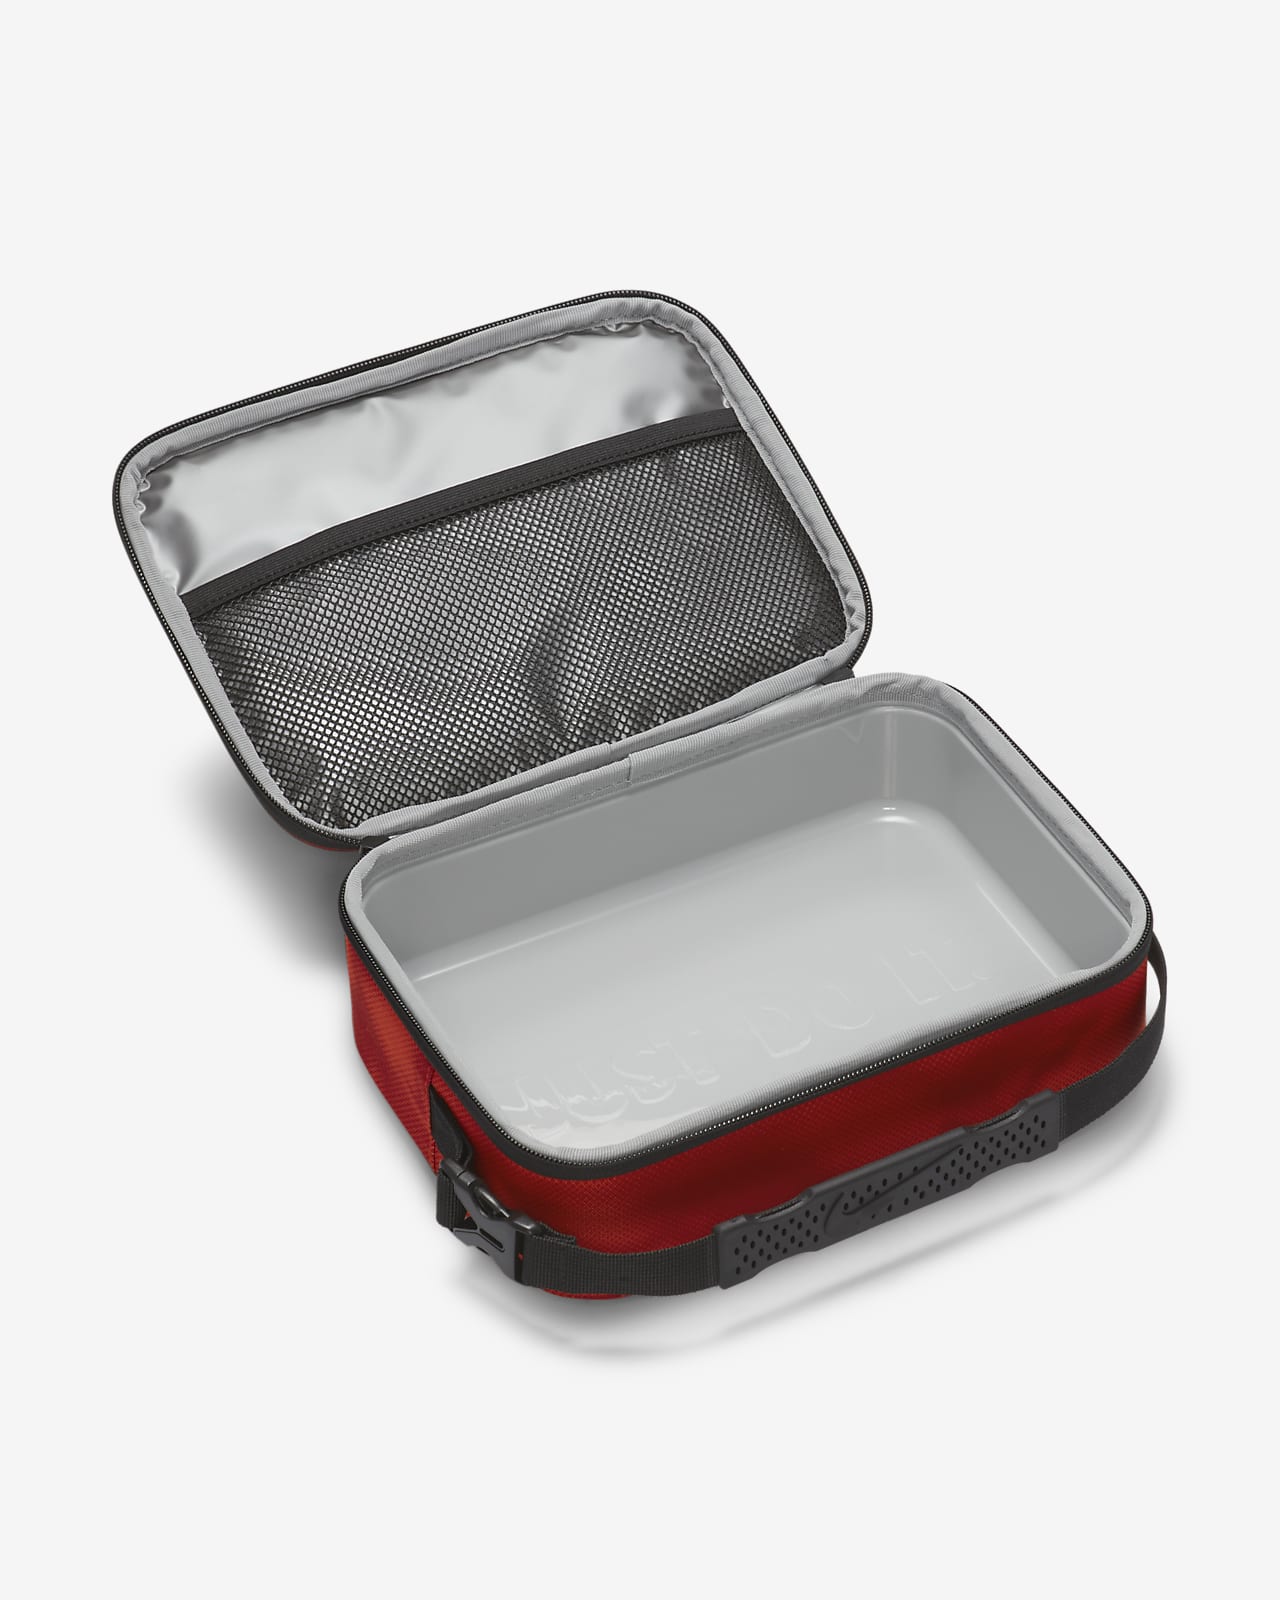 Sell Prada Stainless Steel Lunch Box Set - Silver